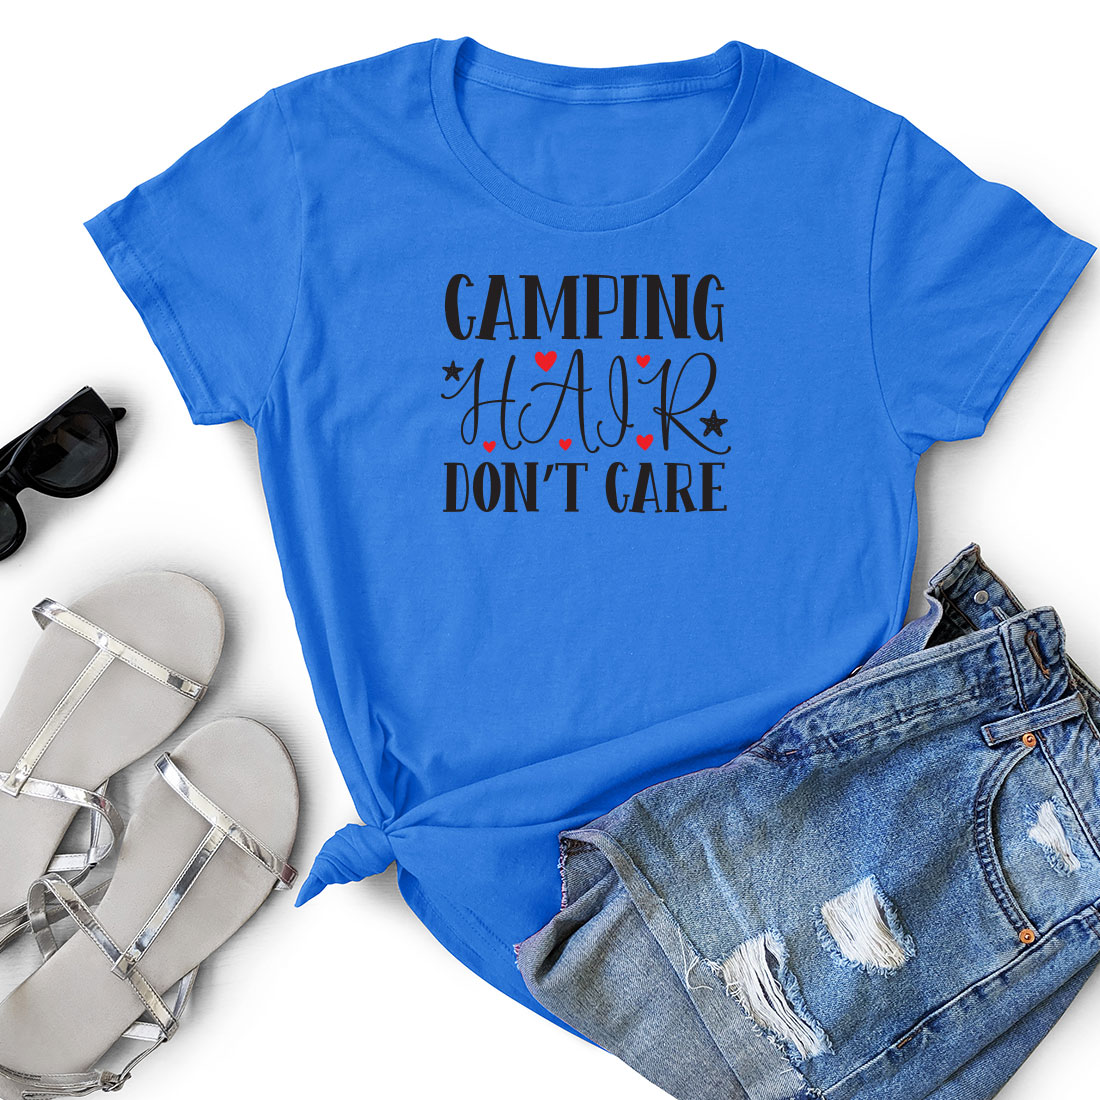 T - shirt that says camping is hard don't care.